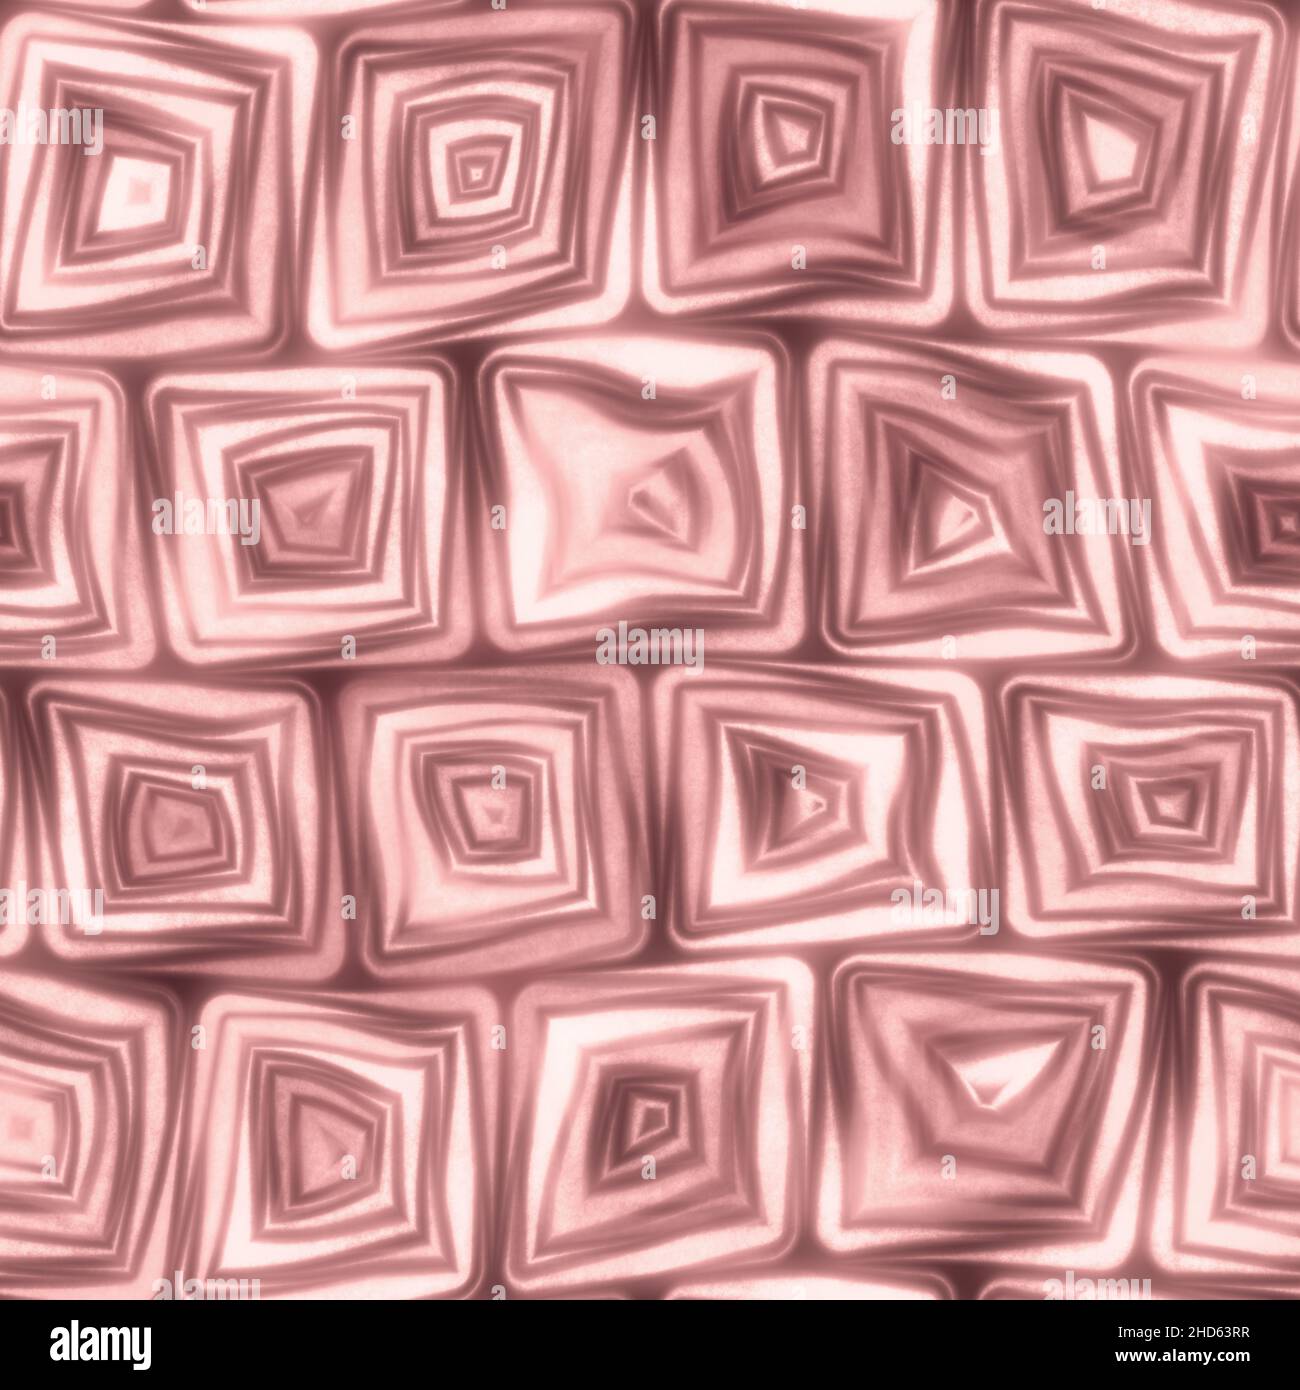 Large Pink Rose Squiggly Swirly Spiral Squares Seamless Texture Pattern Stock Photo